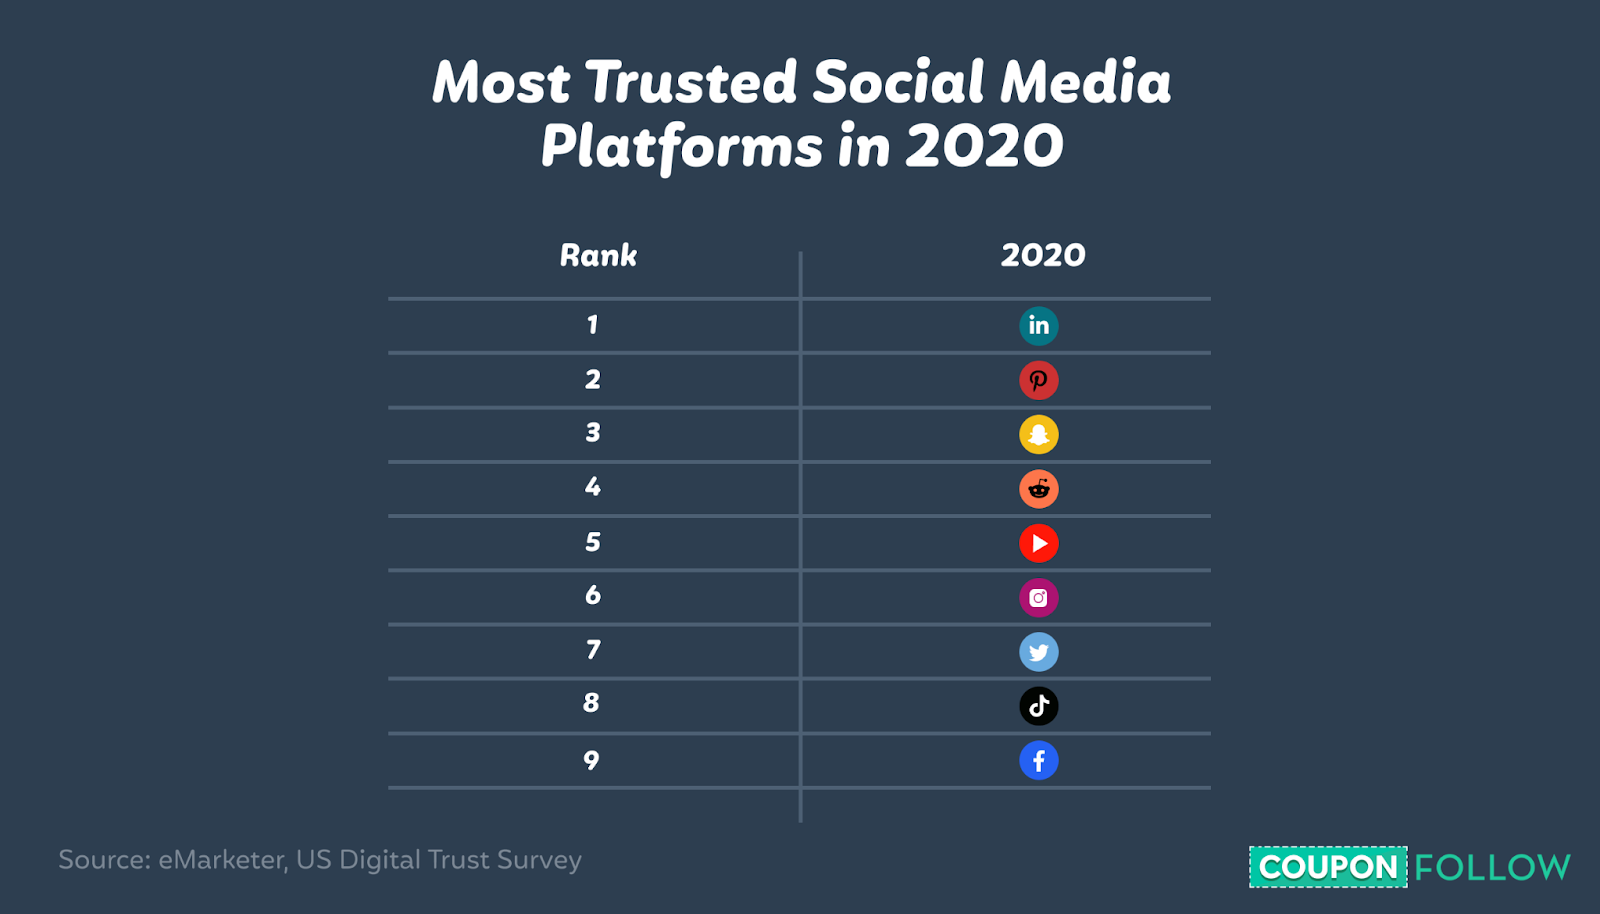 Illustration showing the most trusted social media platforms